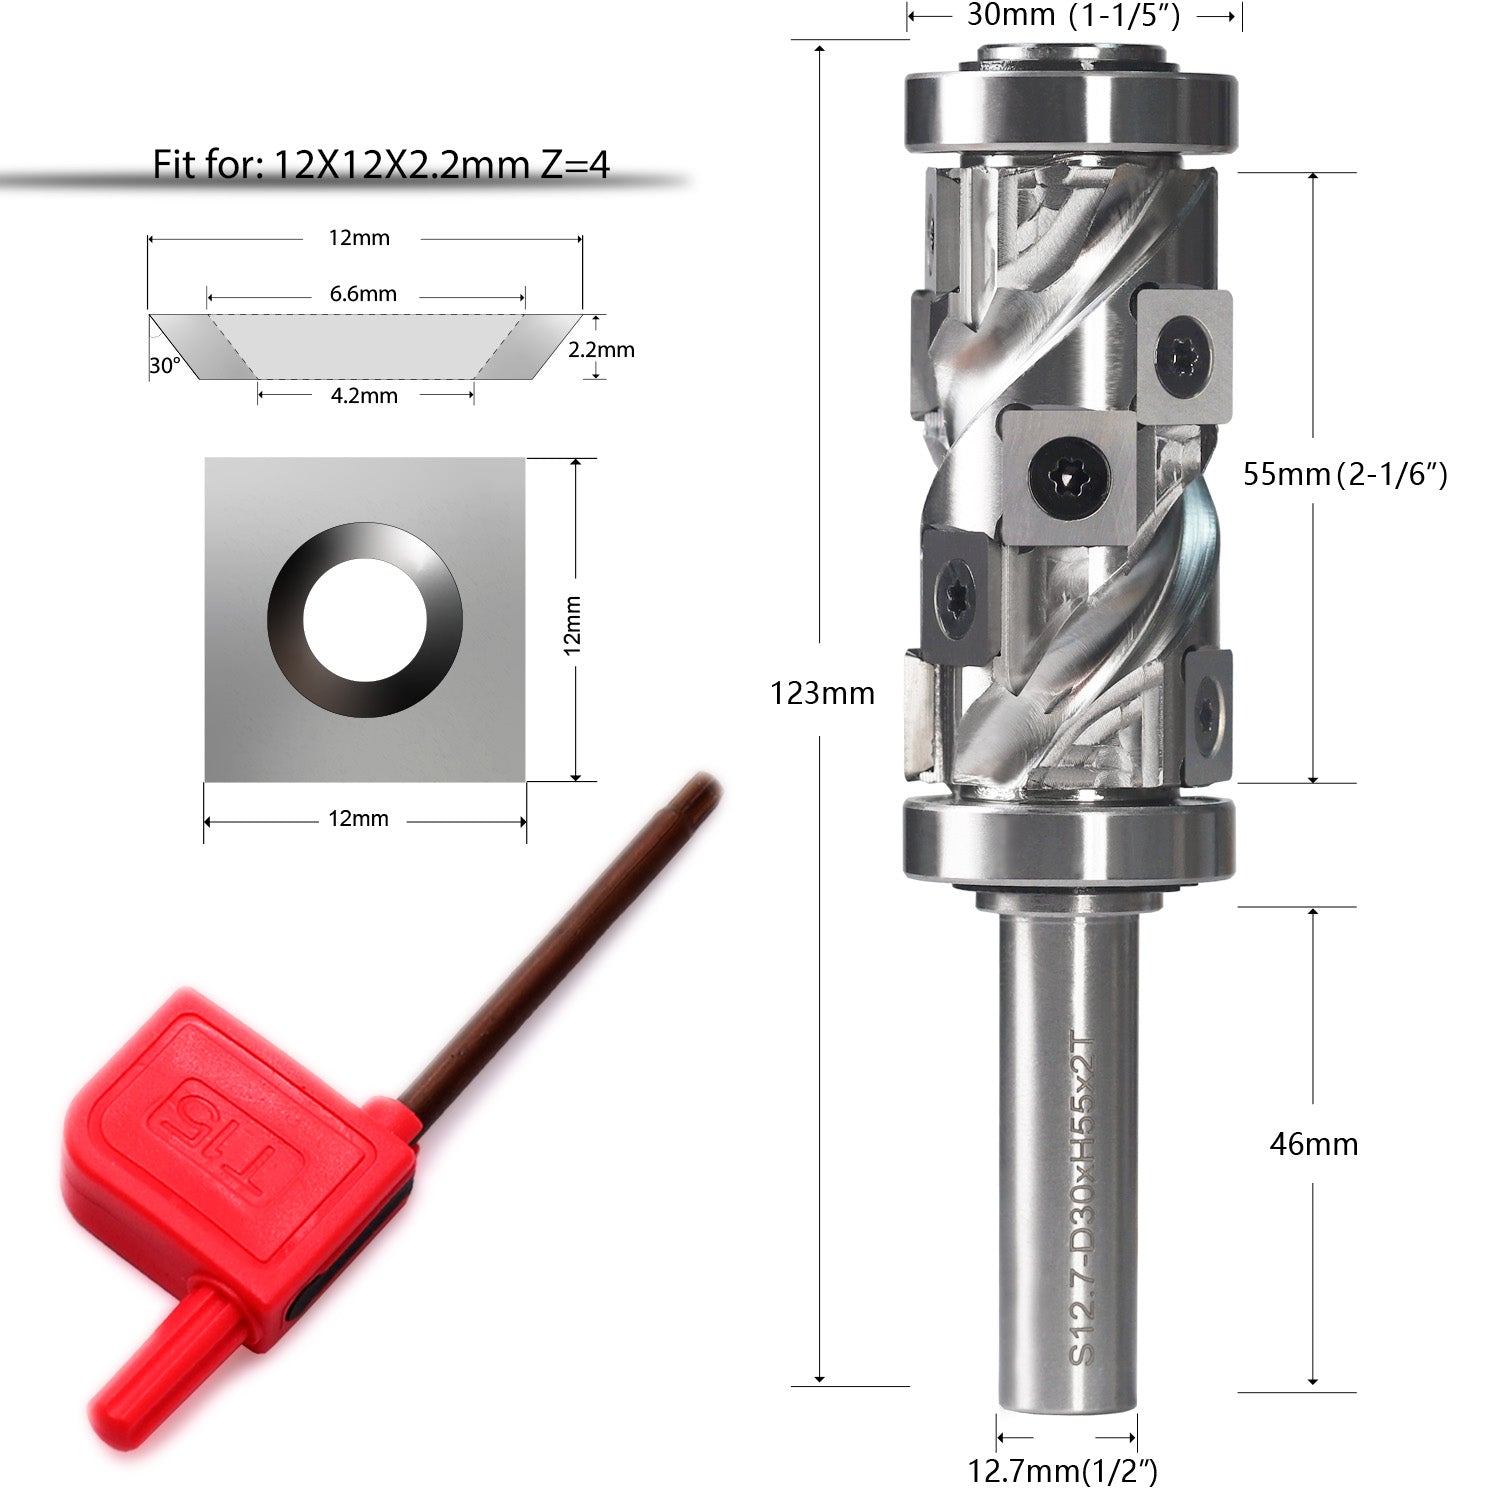 yeptooling double bearing flush trim router bit milling cutter for woodworking trimming, 1/2 inch shank diameter, 1-1/5 inch cutting diameter, 2-1/6 inch cutting length, 4-4/5 inch overall length 